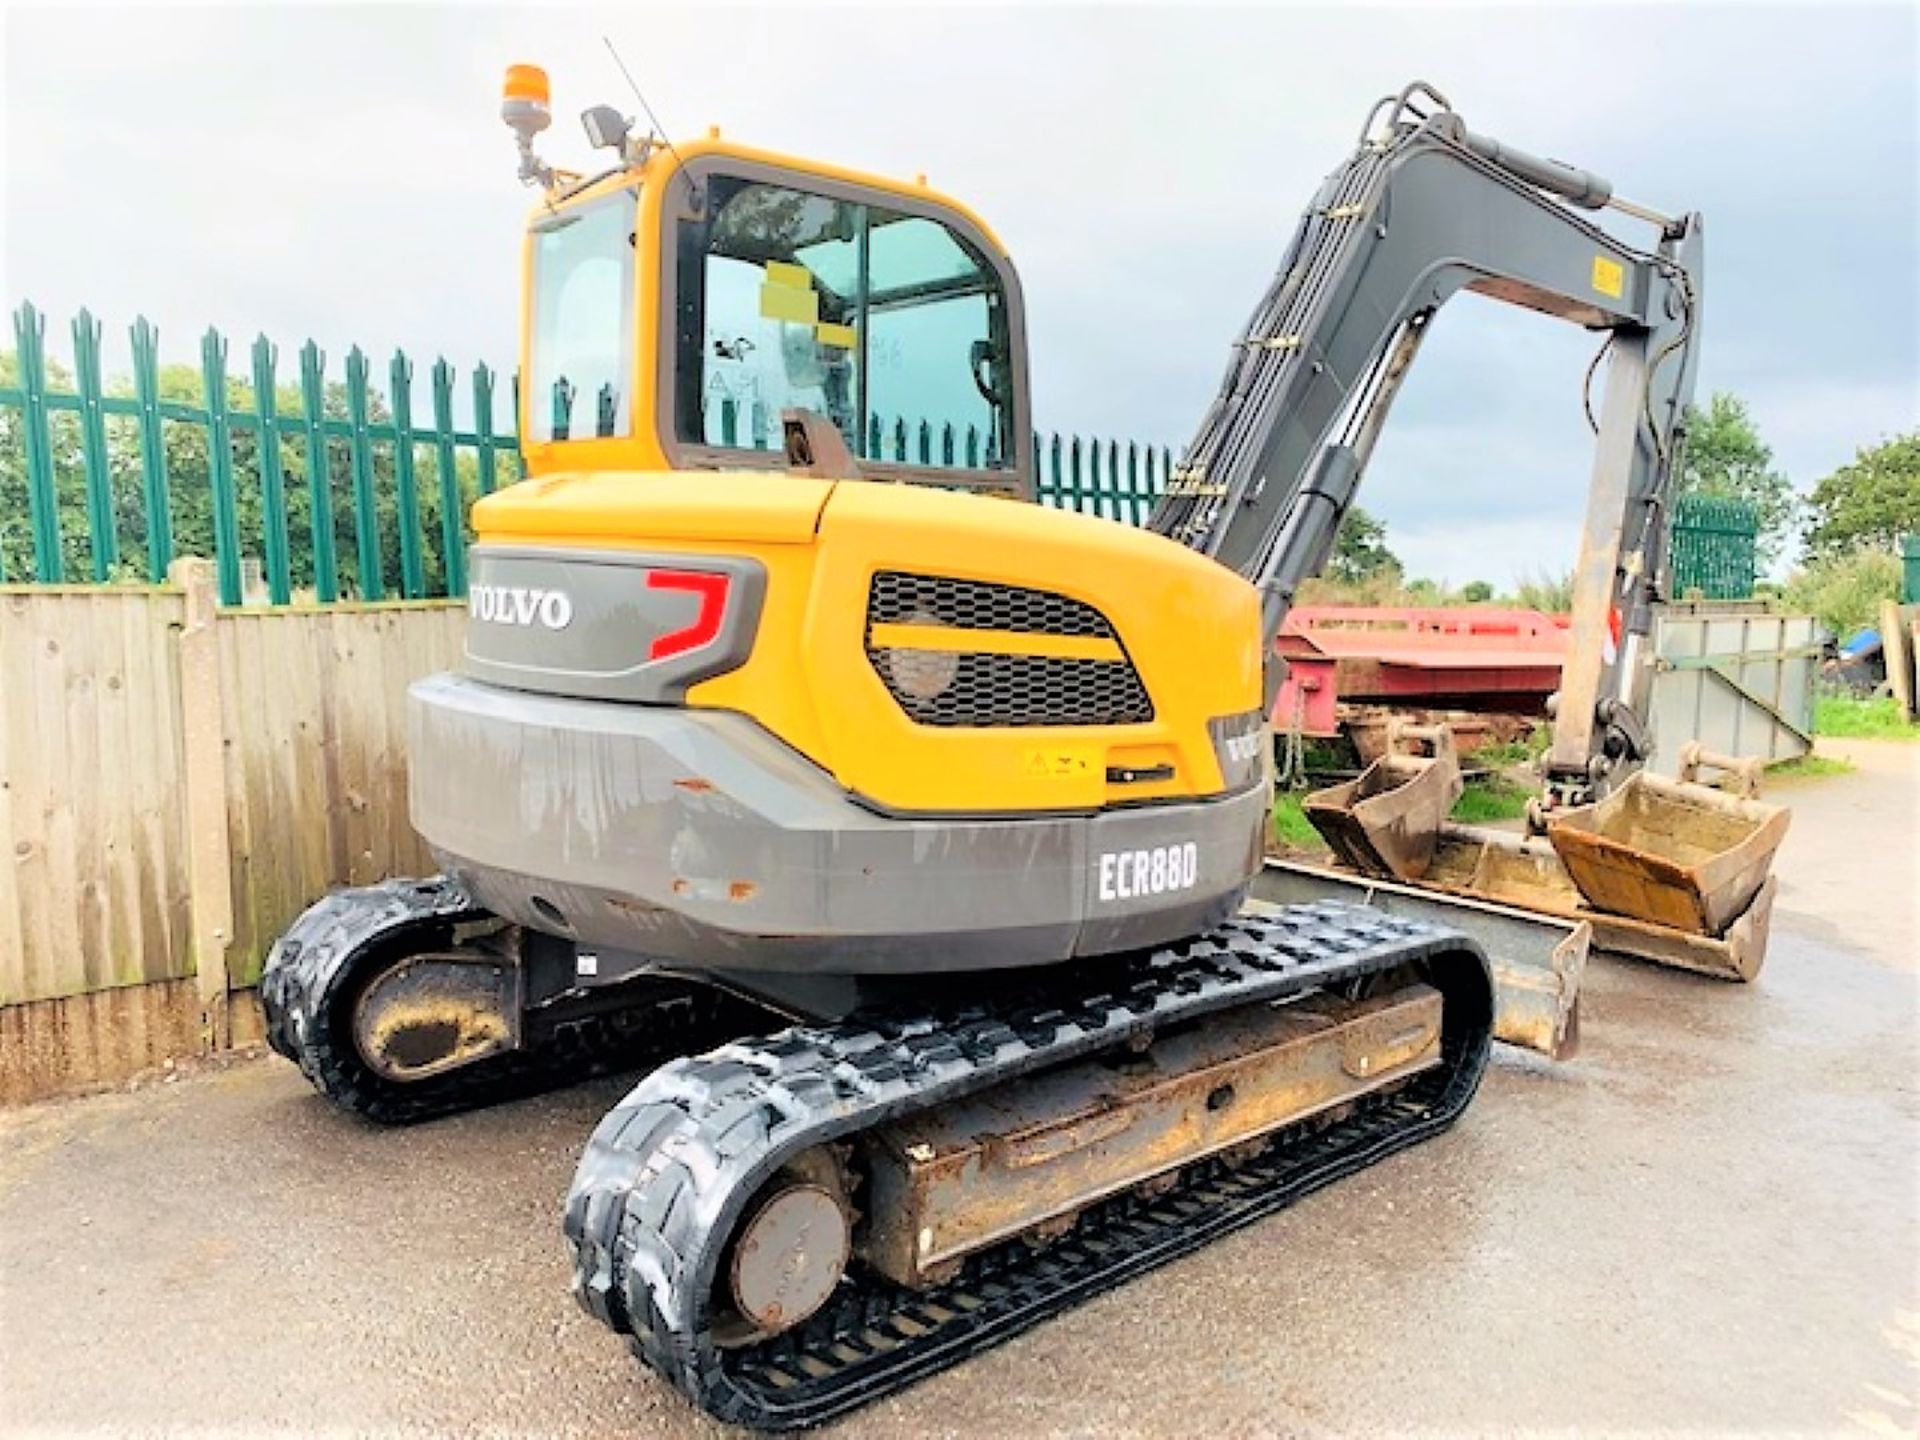 VOLVO ECR88D RUBBER TRACKED DIGGER / EXCAVATOR, YEAR 2015, 4148 HOURS, 3 X BUCKETS, AIR CON, RADIO - Image 4 of 17